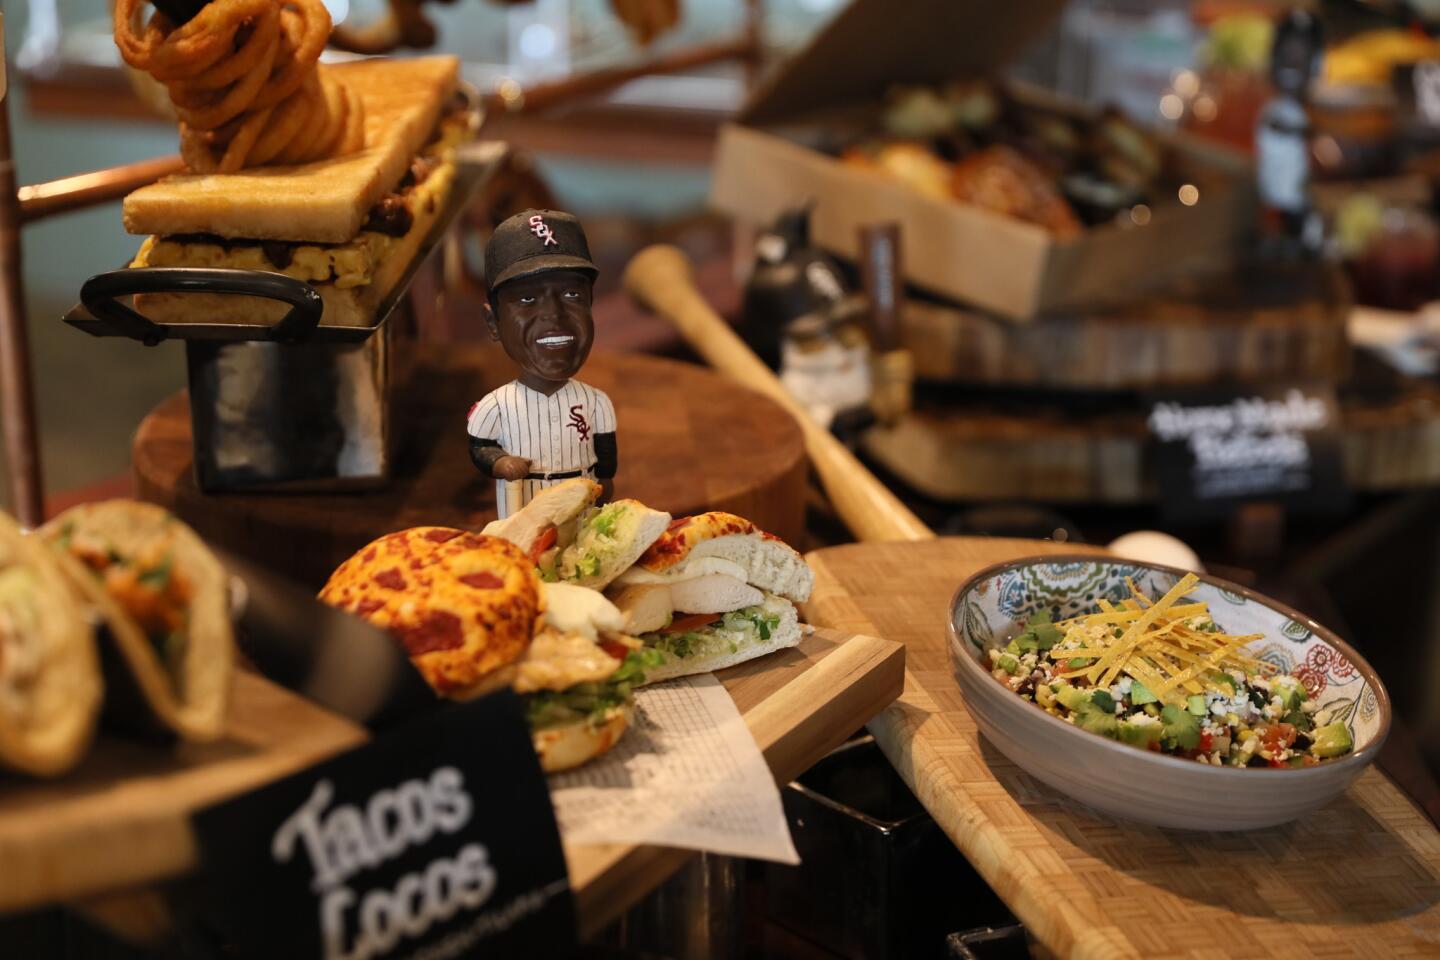 Media get a look at the fare being offered to White Sox fans during a trip to Guaranteed Rate Field on March 29, 2017.